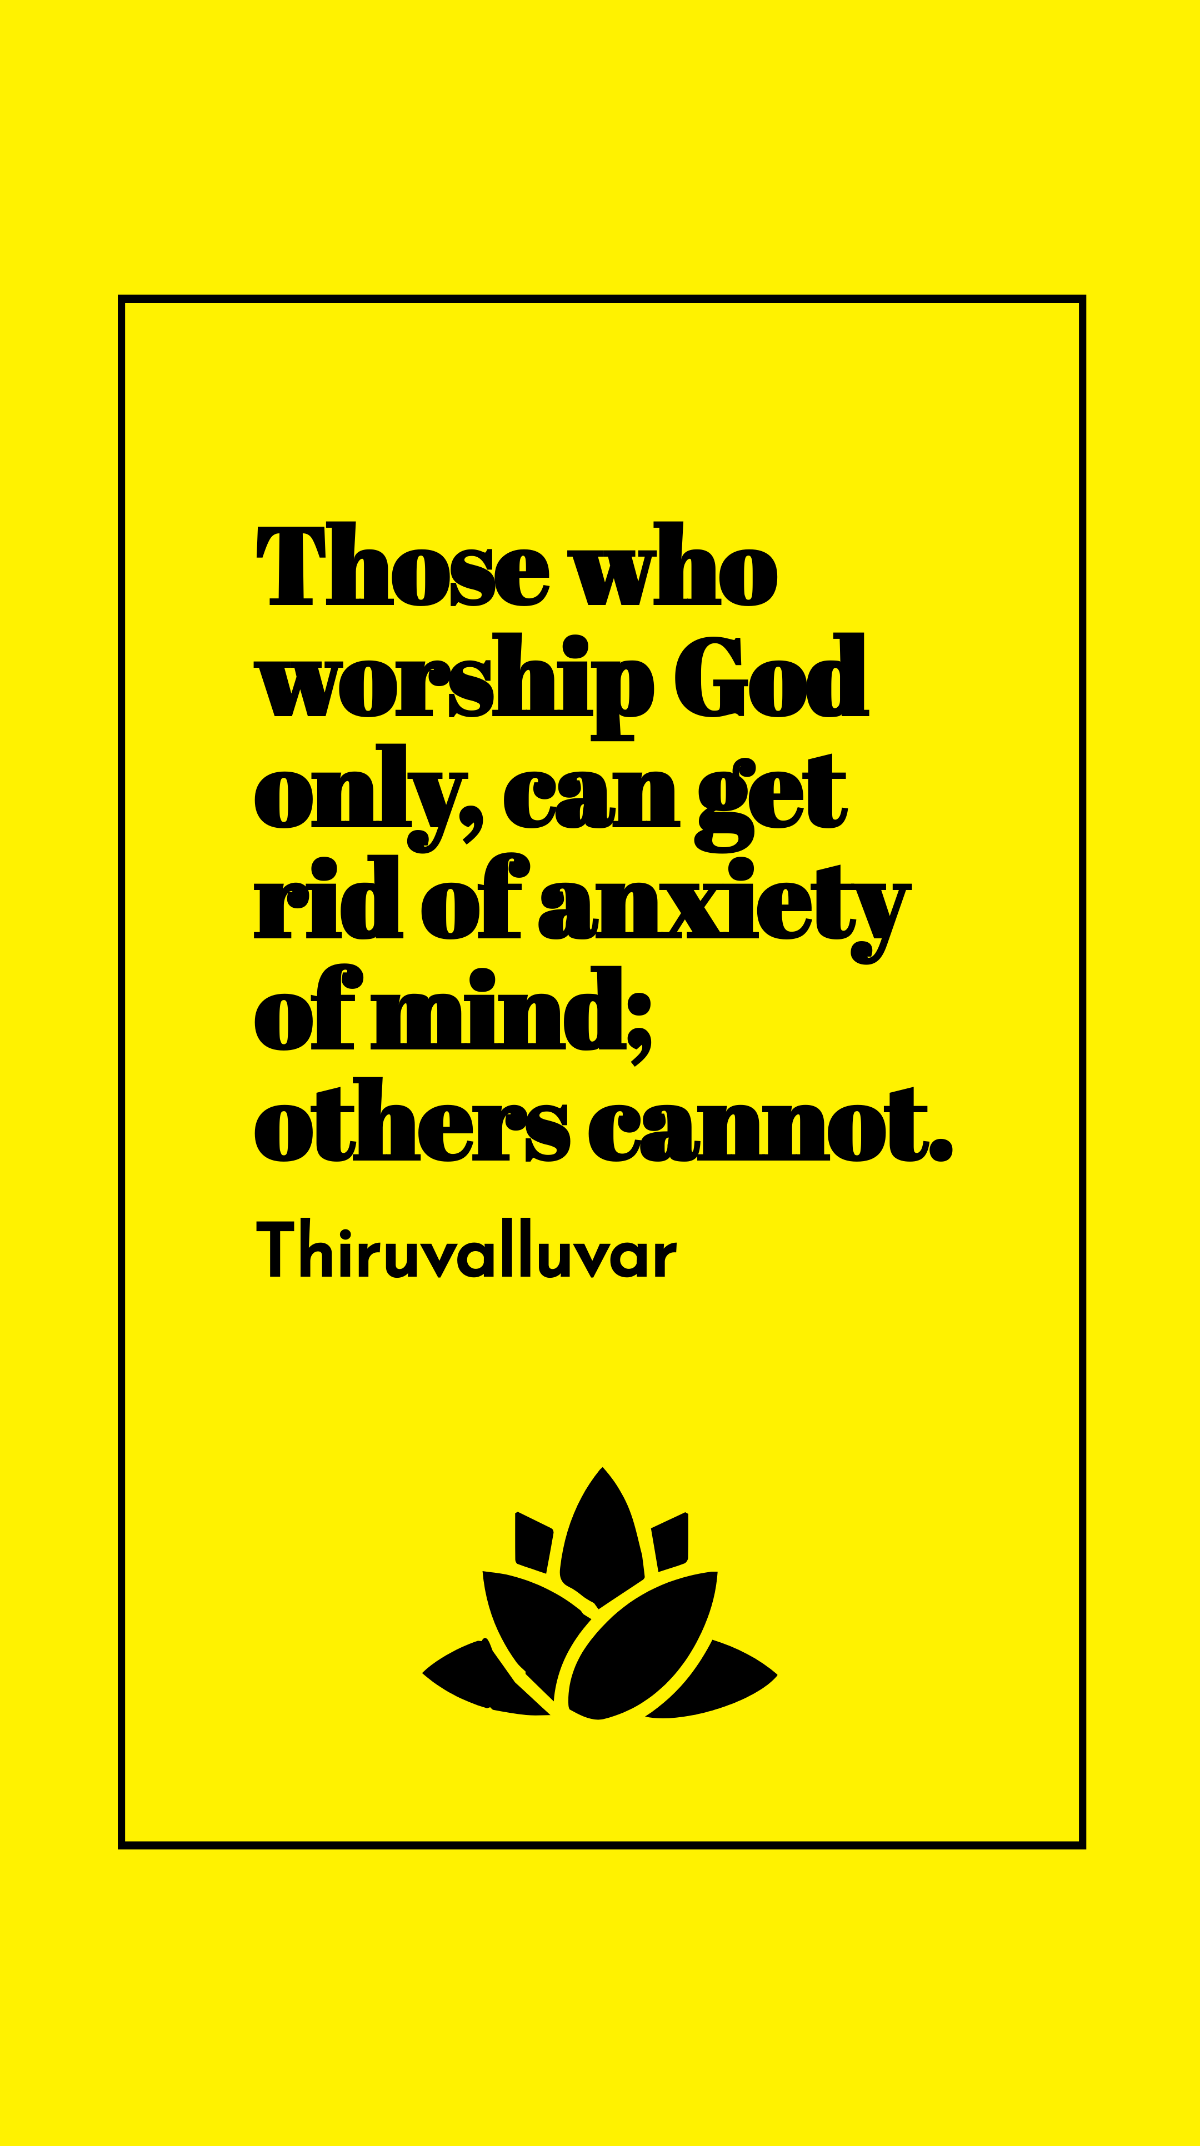 Free Thiruvalluvar - Those who worship God only, can get rid of anxiety of mind; others cannot. Template